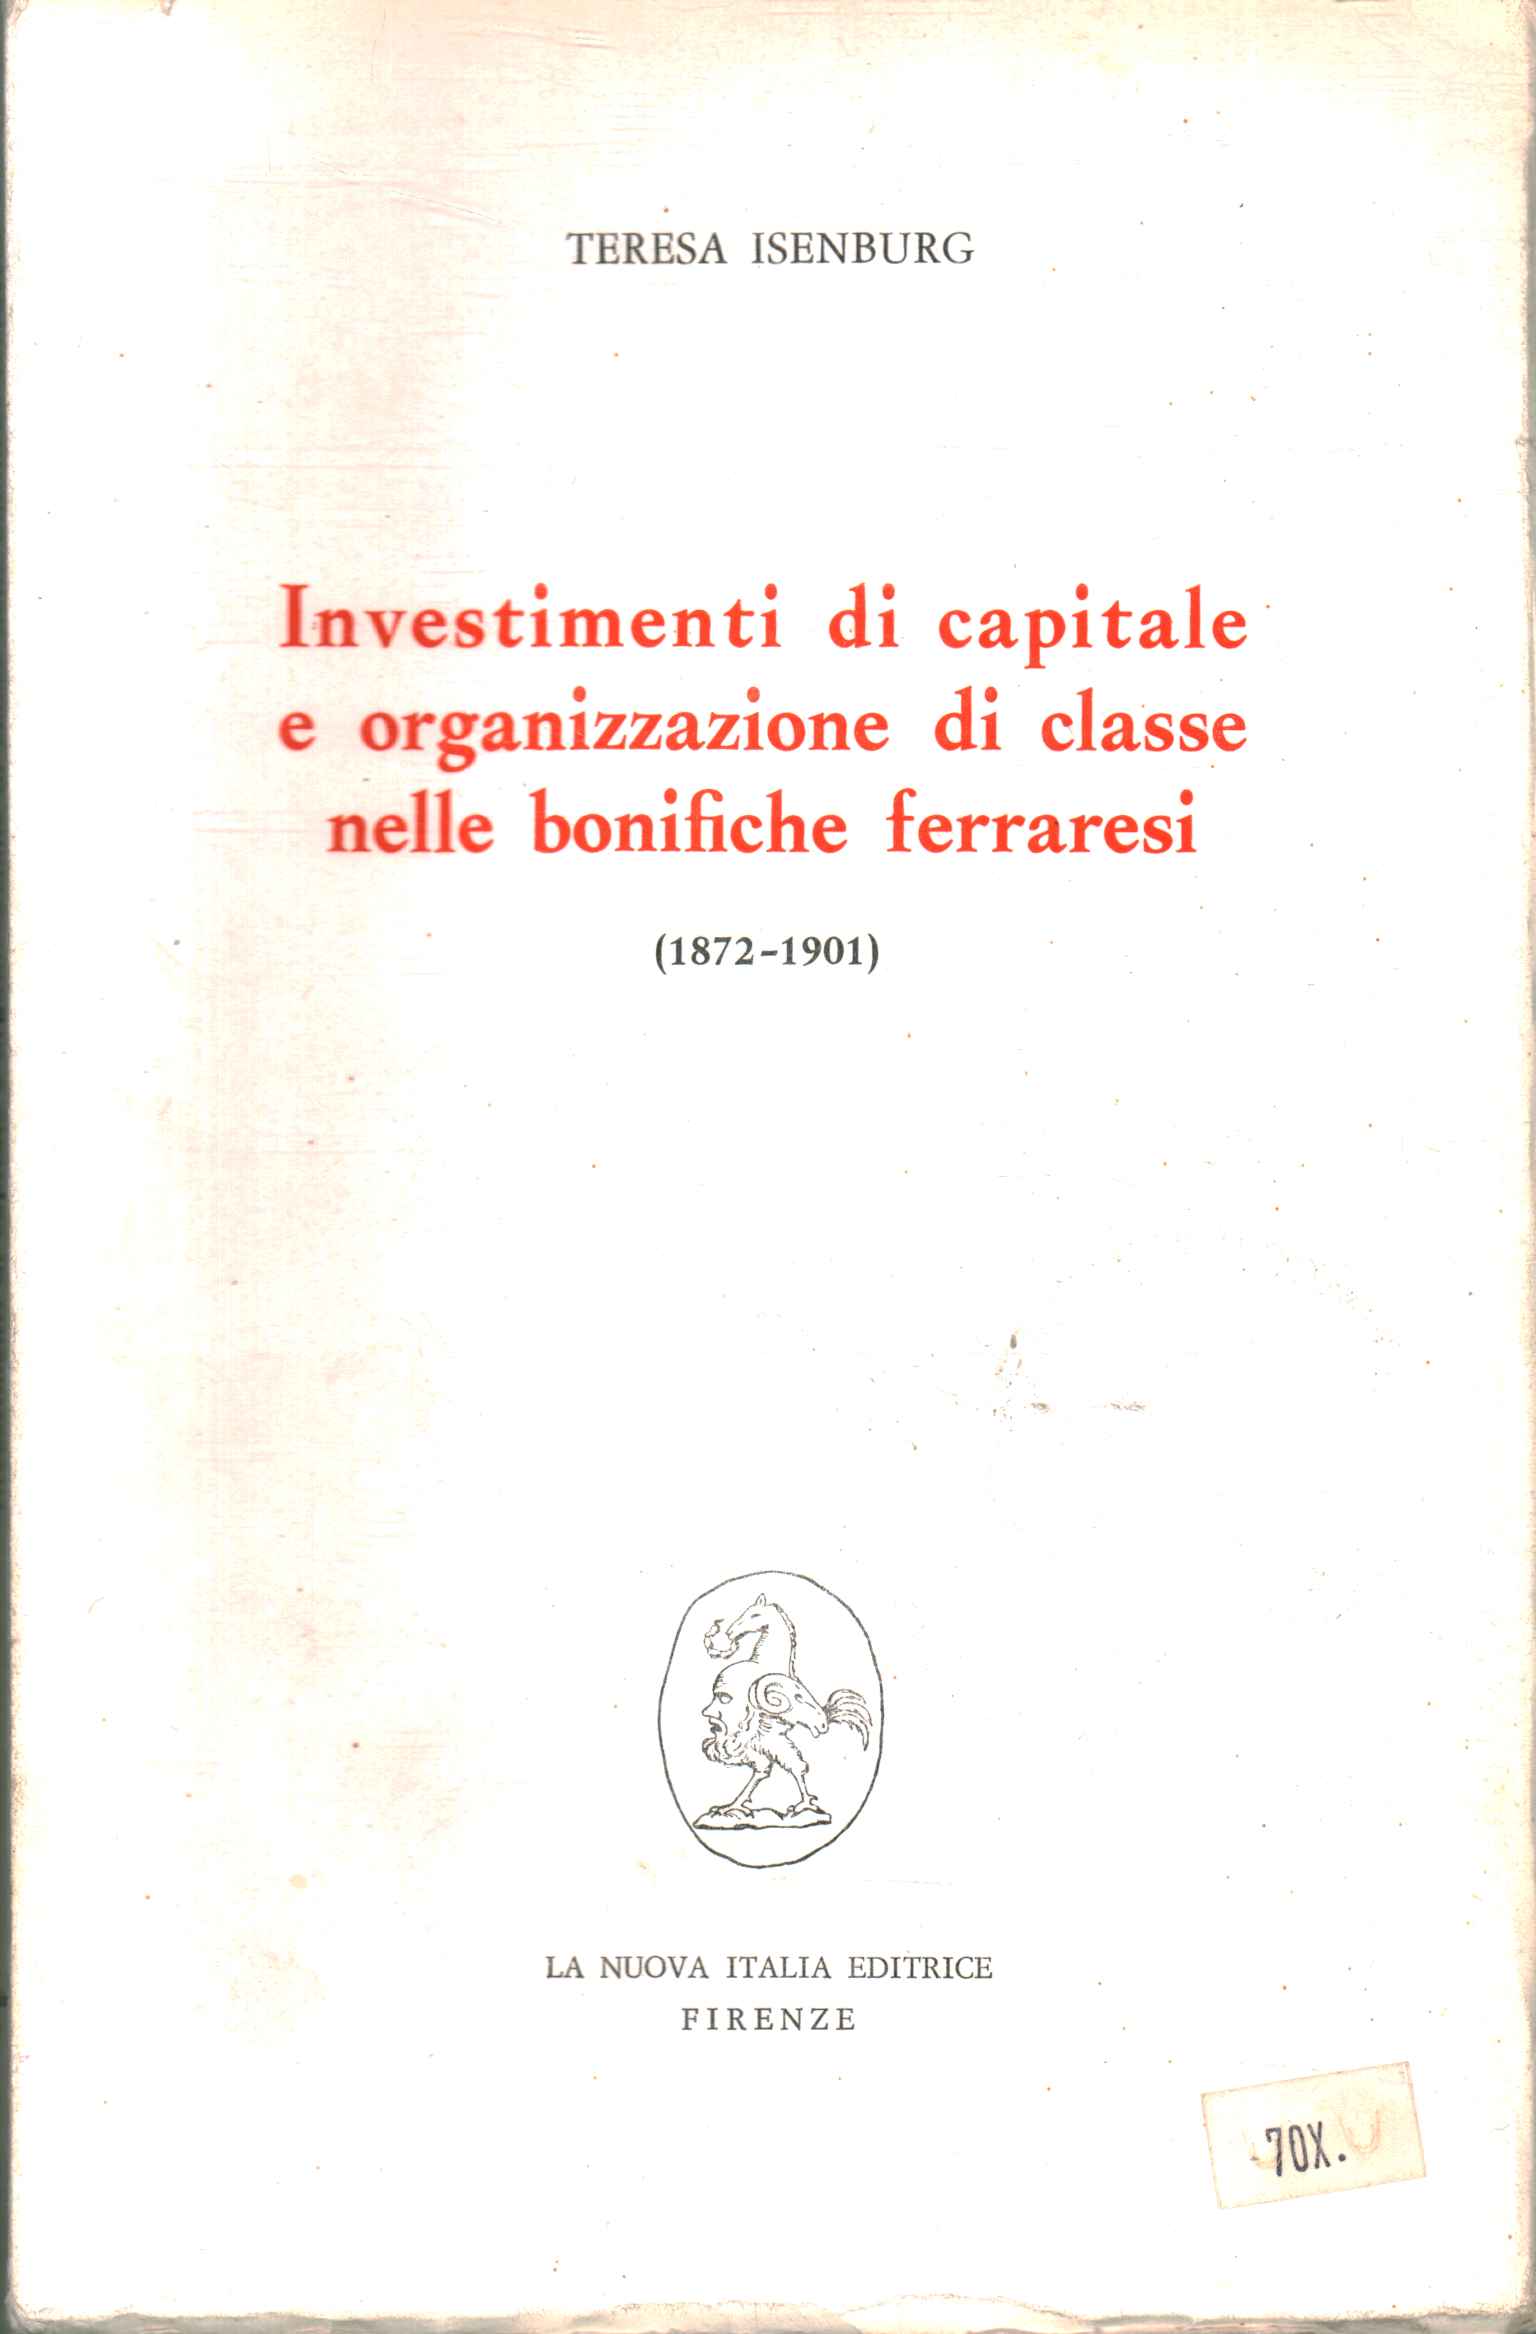 Capital investments and organization%